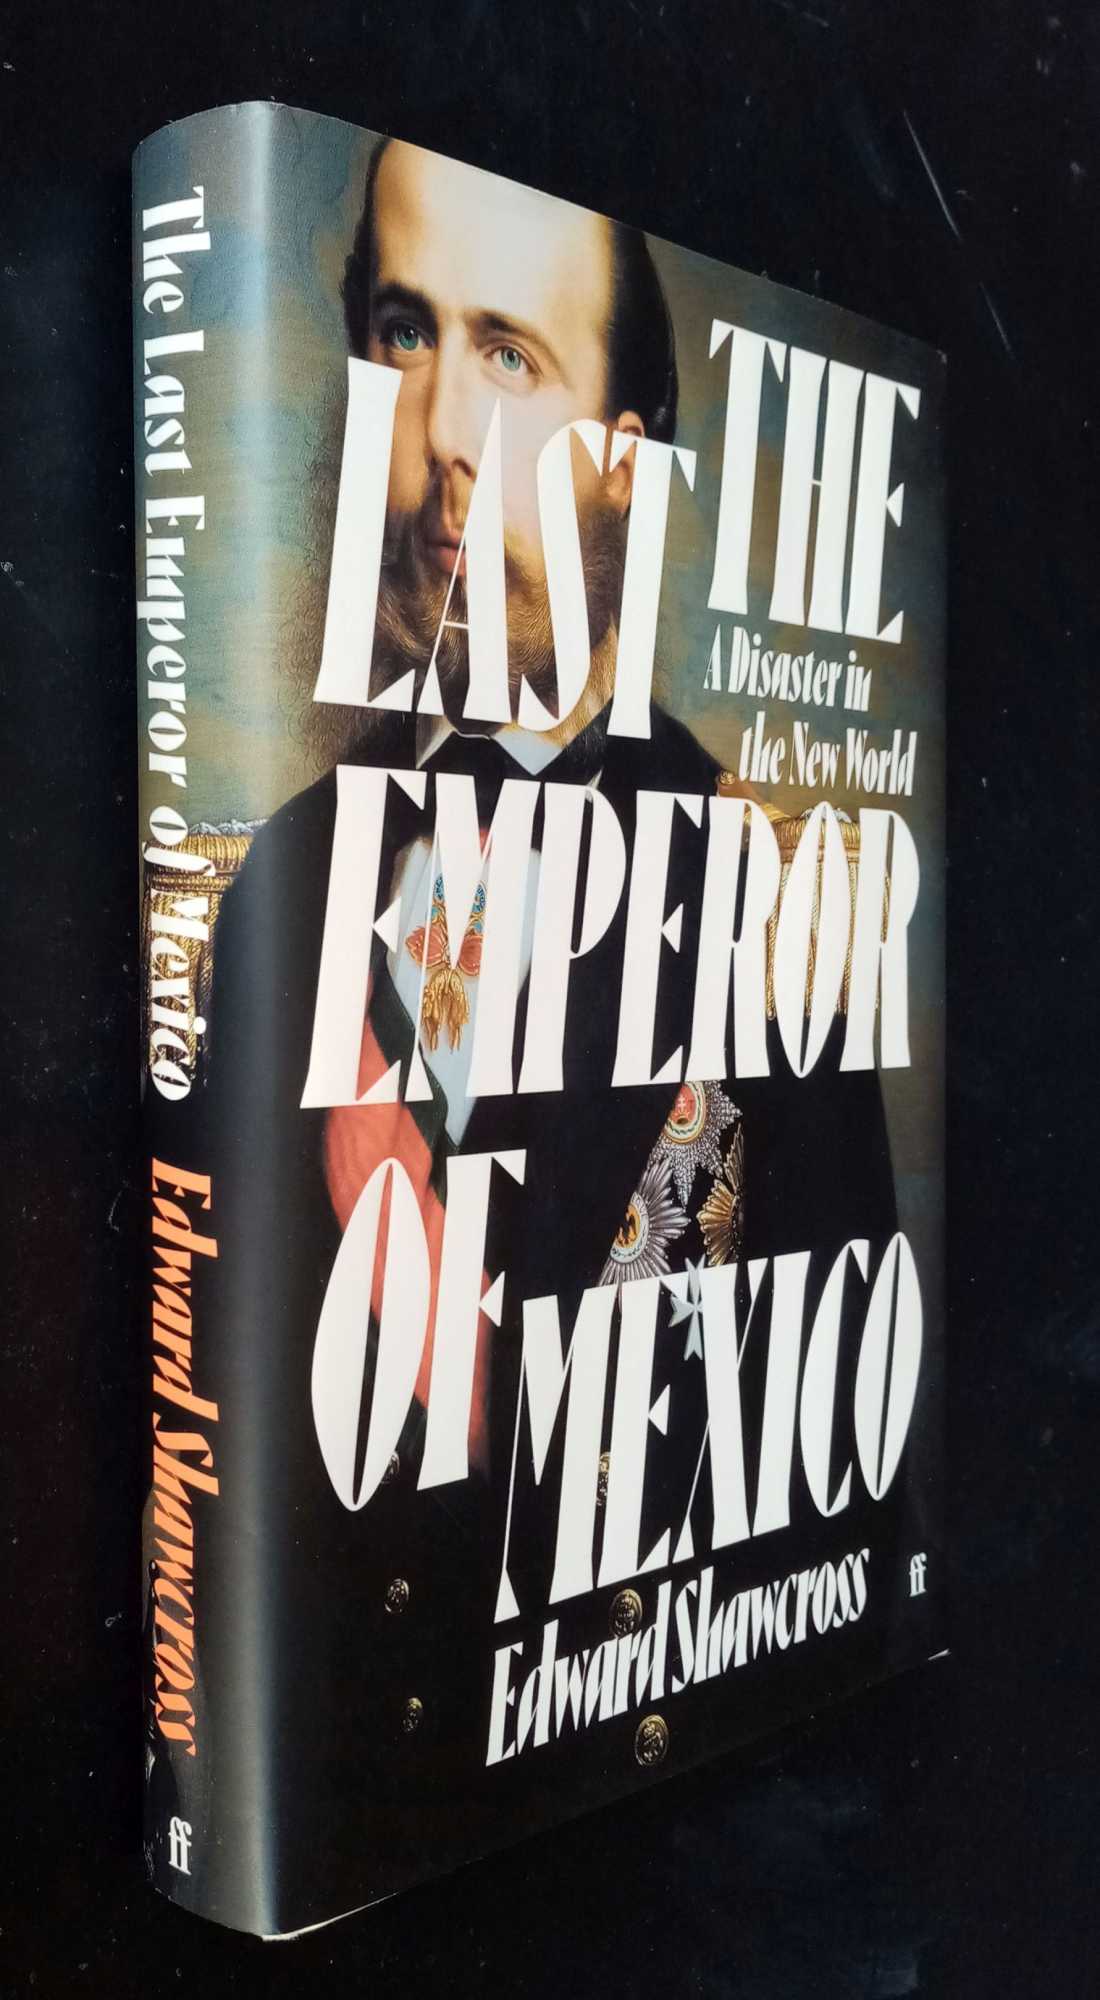 Edward Shawcross - The Last Emperor of Mexico: A Disaster in the New World